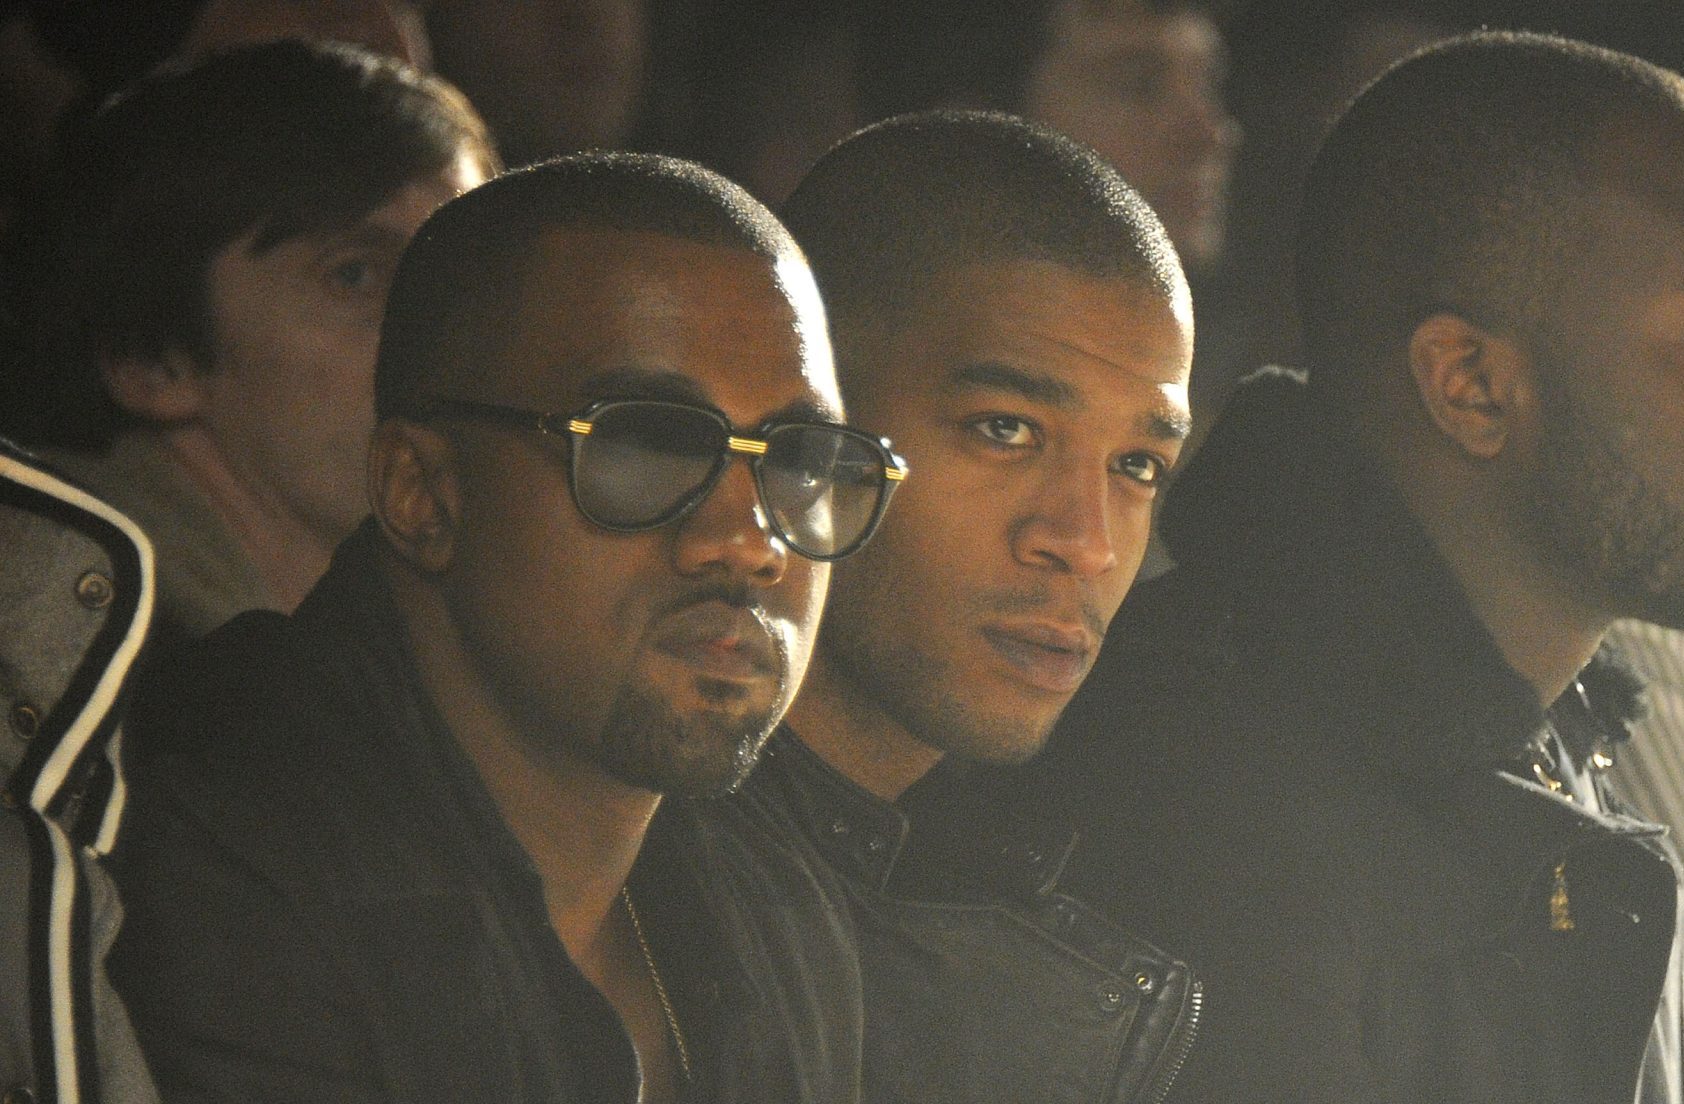 Kid Cudi Confirms The Halt Of His Friendship And Song Collaborations With Kanye West